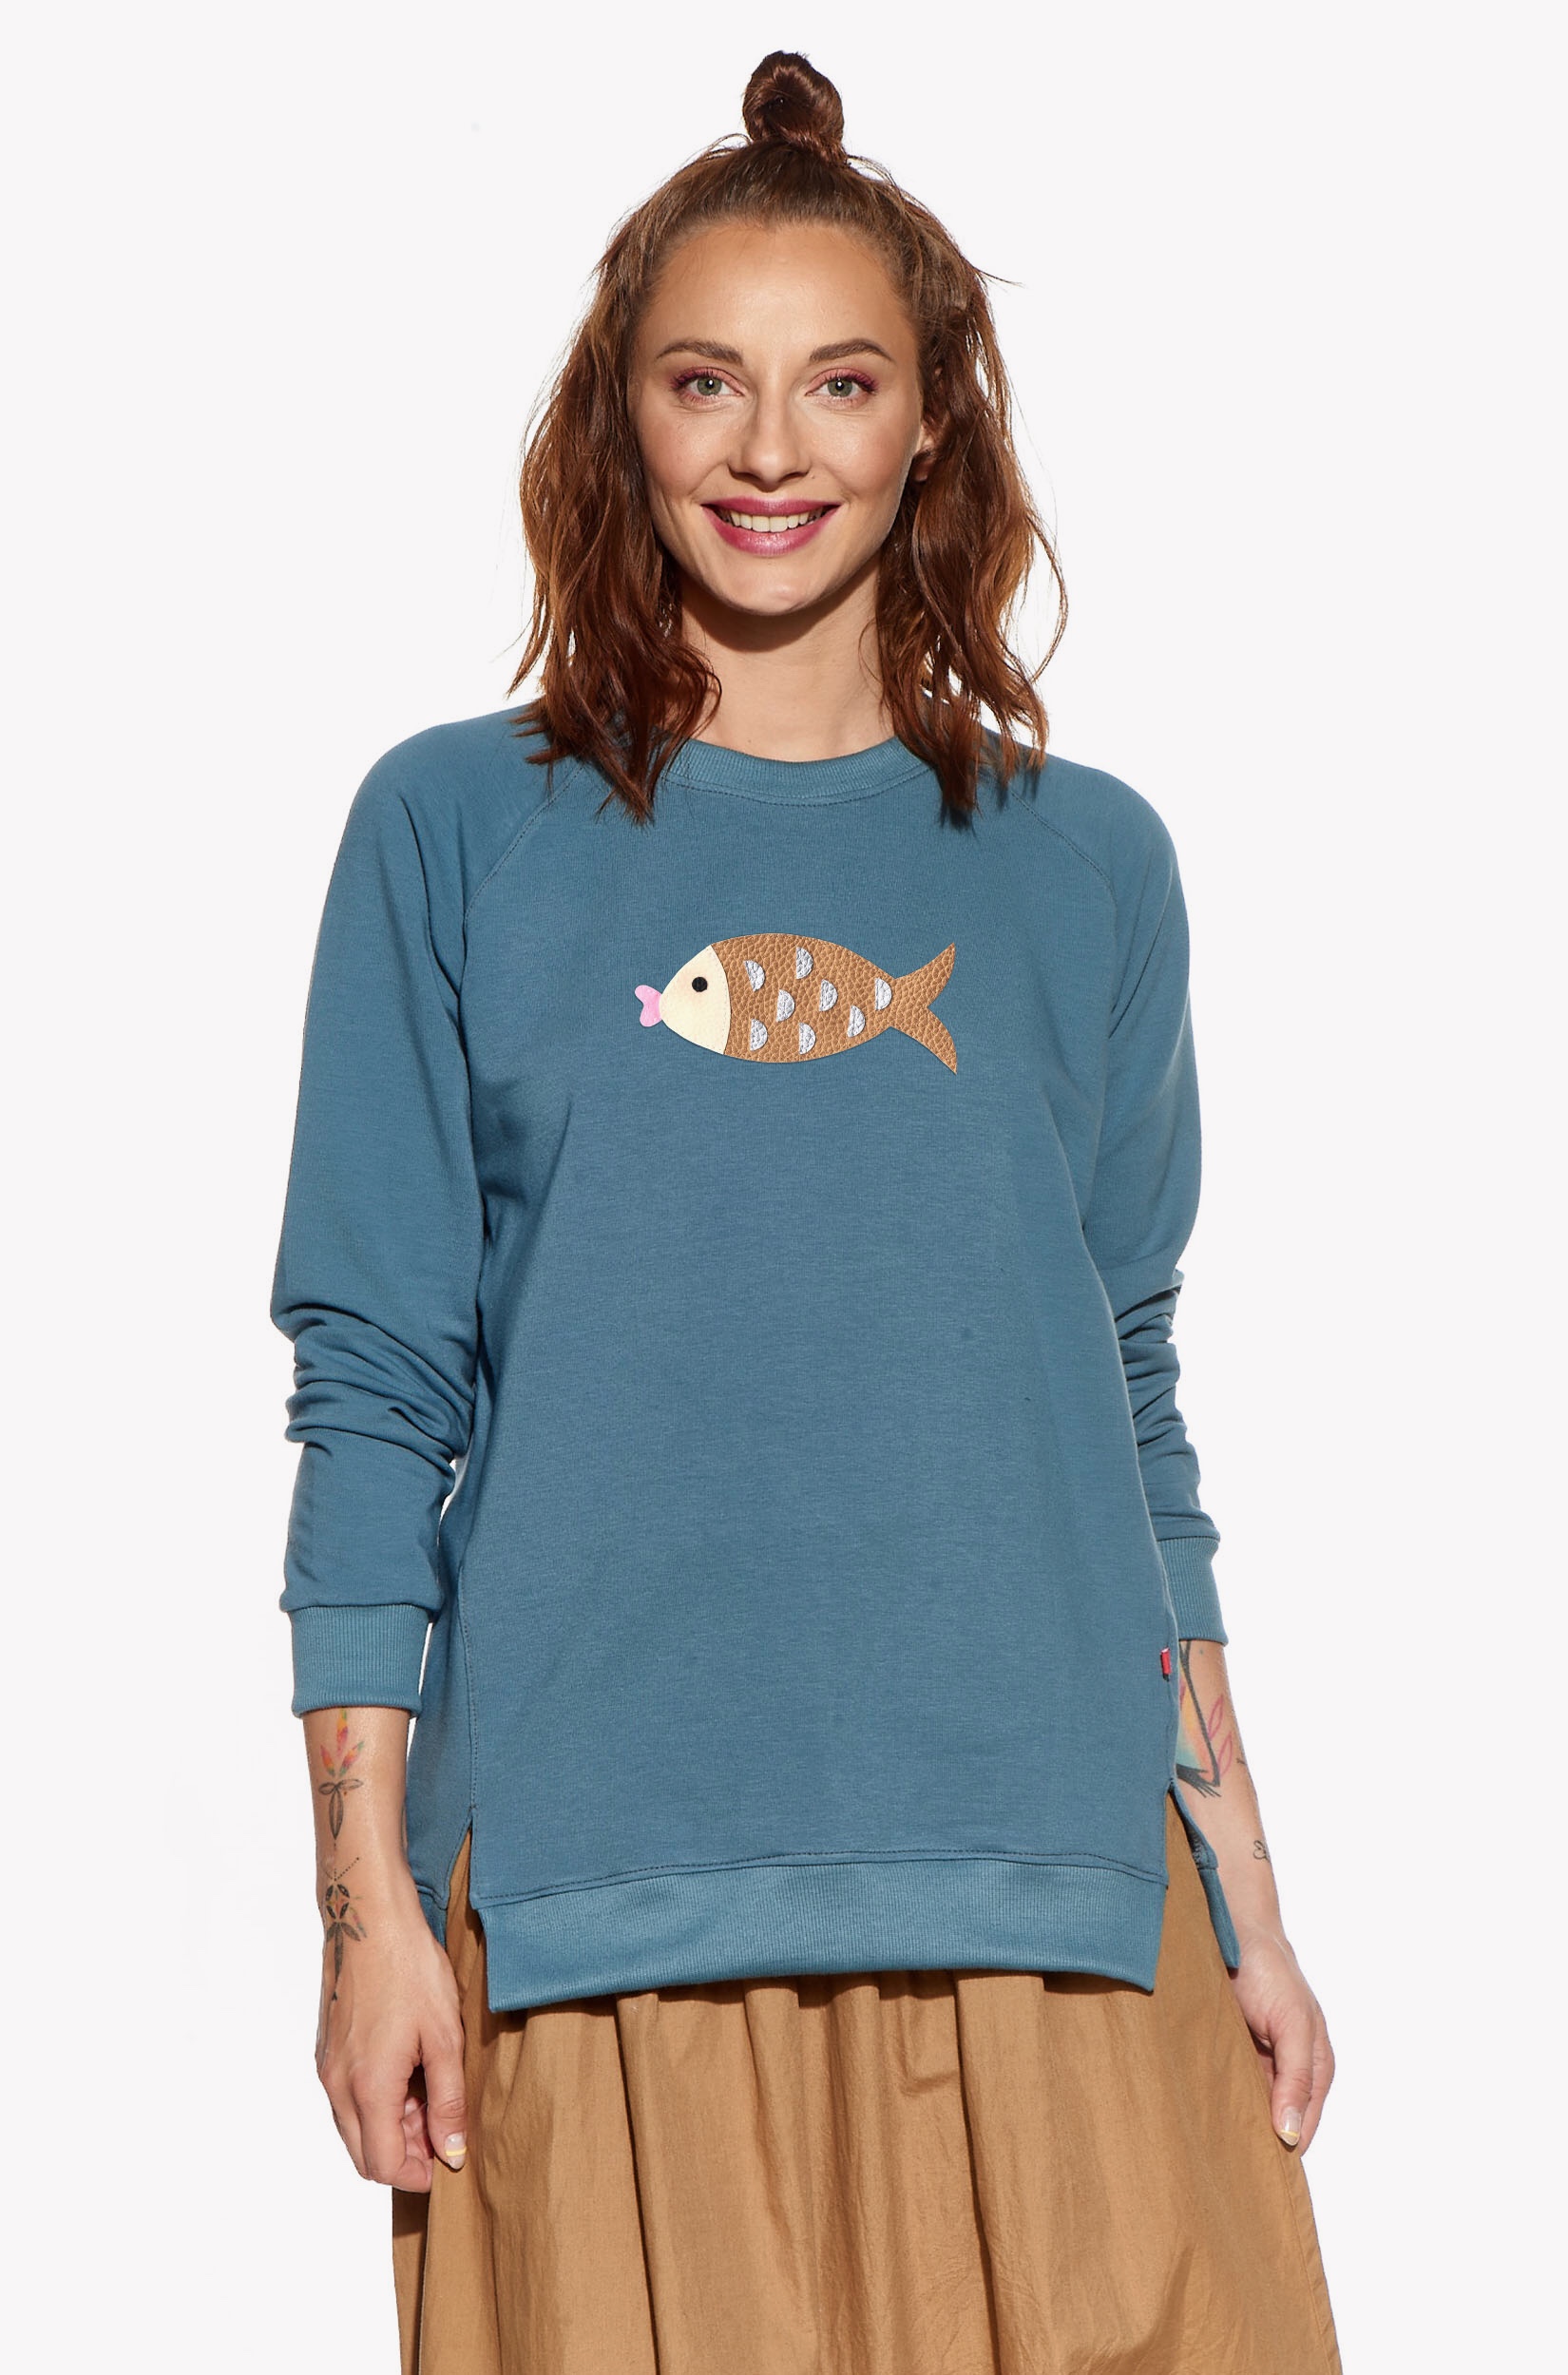 Hoodie with fish